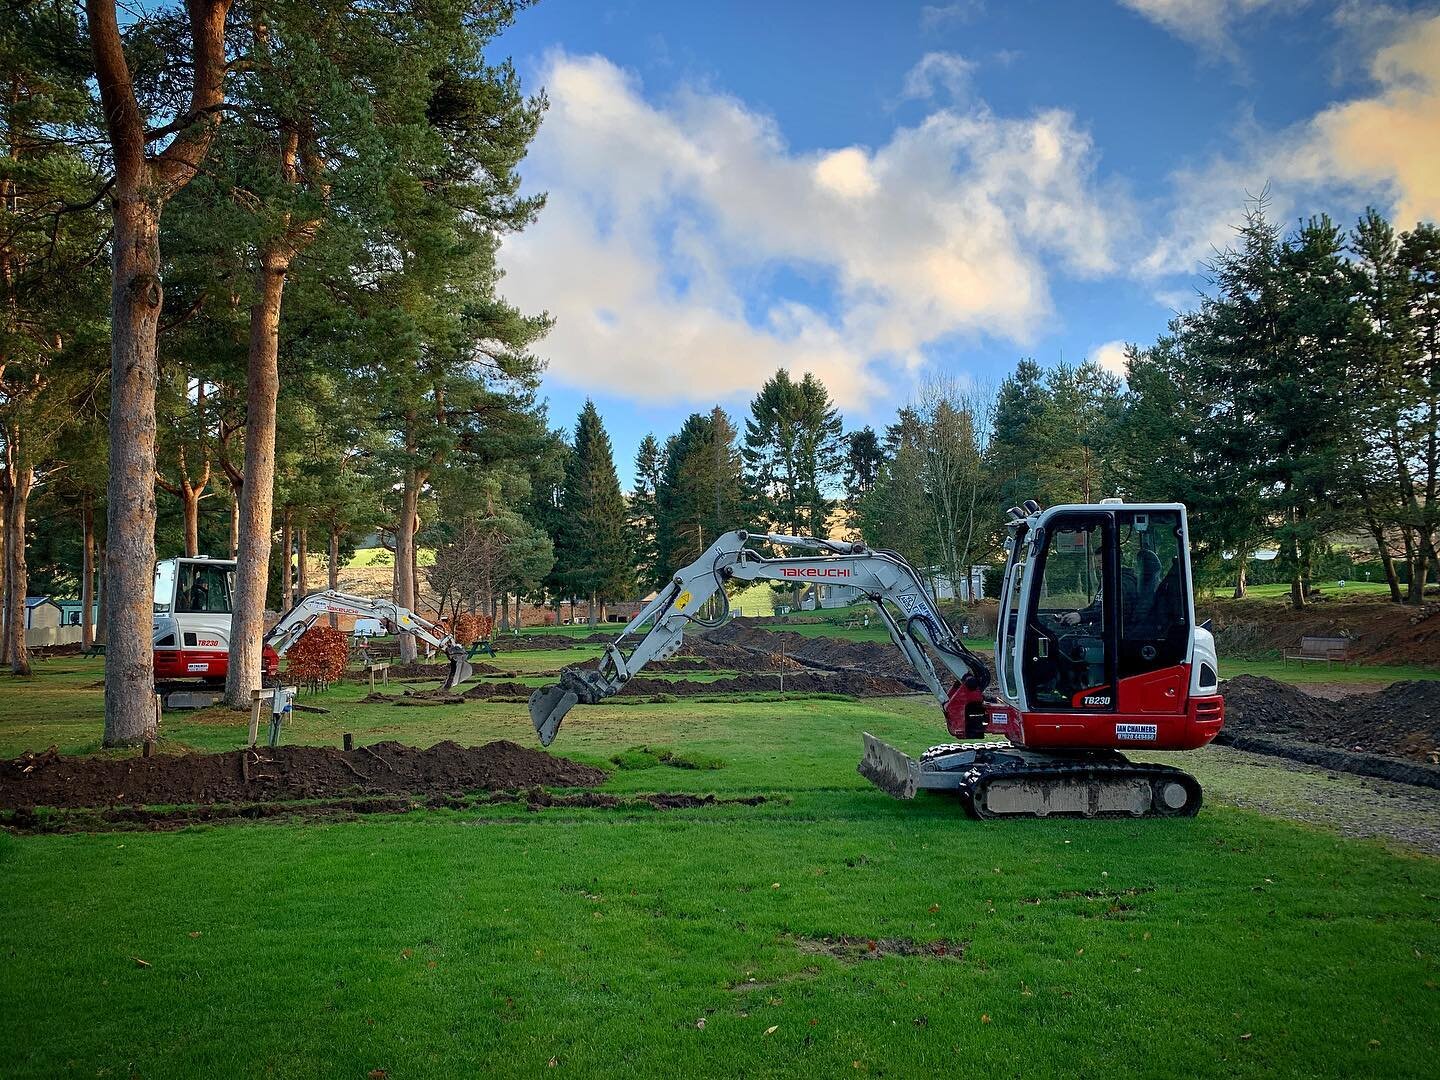 Can&rsquo;t beat a little bit of light landscaping 🤪🏕🥃❤️ We can&rsquo;t wait to welcome you all back to the new and improved Speyside Gardens xx Big Love xx #speysidegardenscaravanpark #takeuchi #digger #camping #glamping #visitscotland